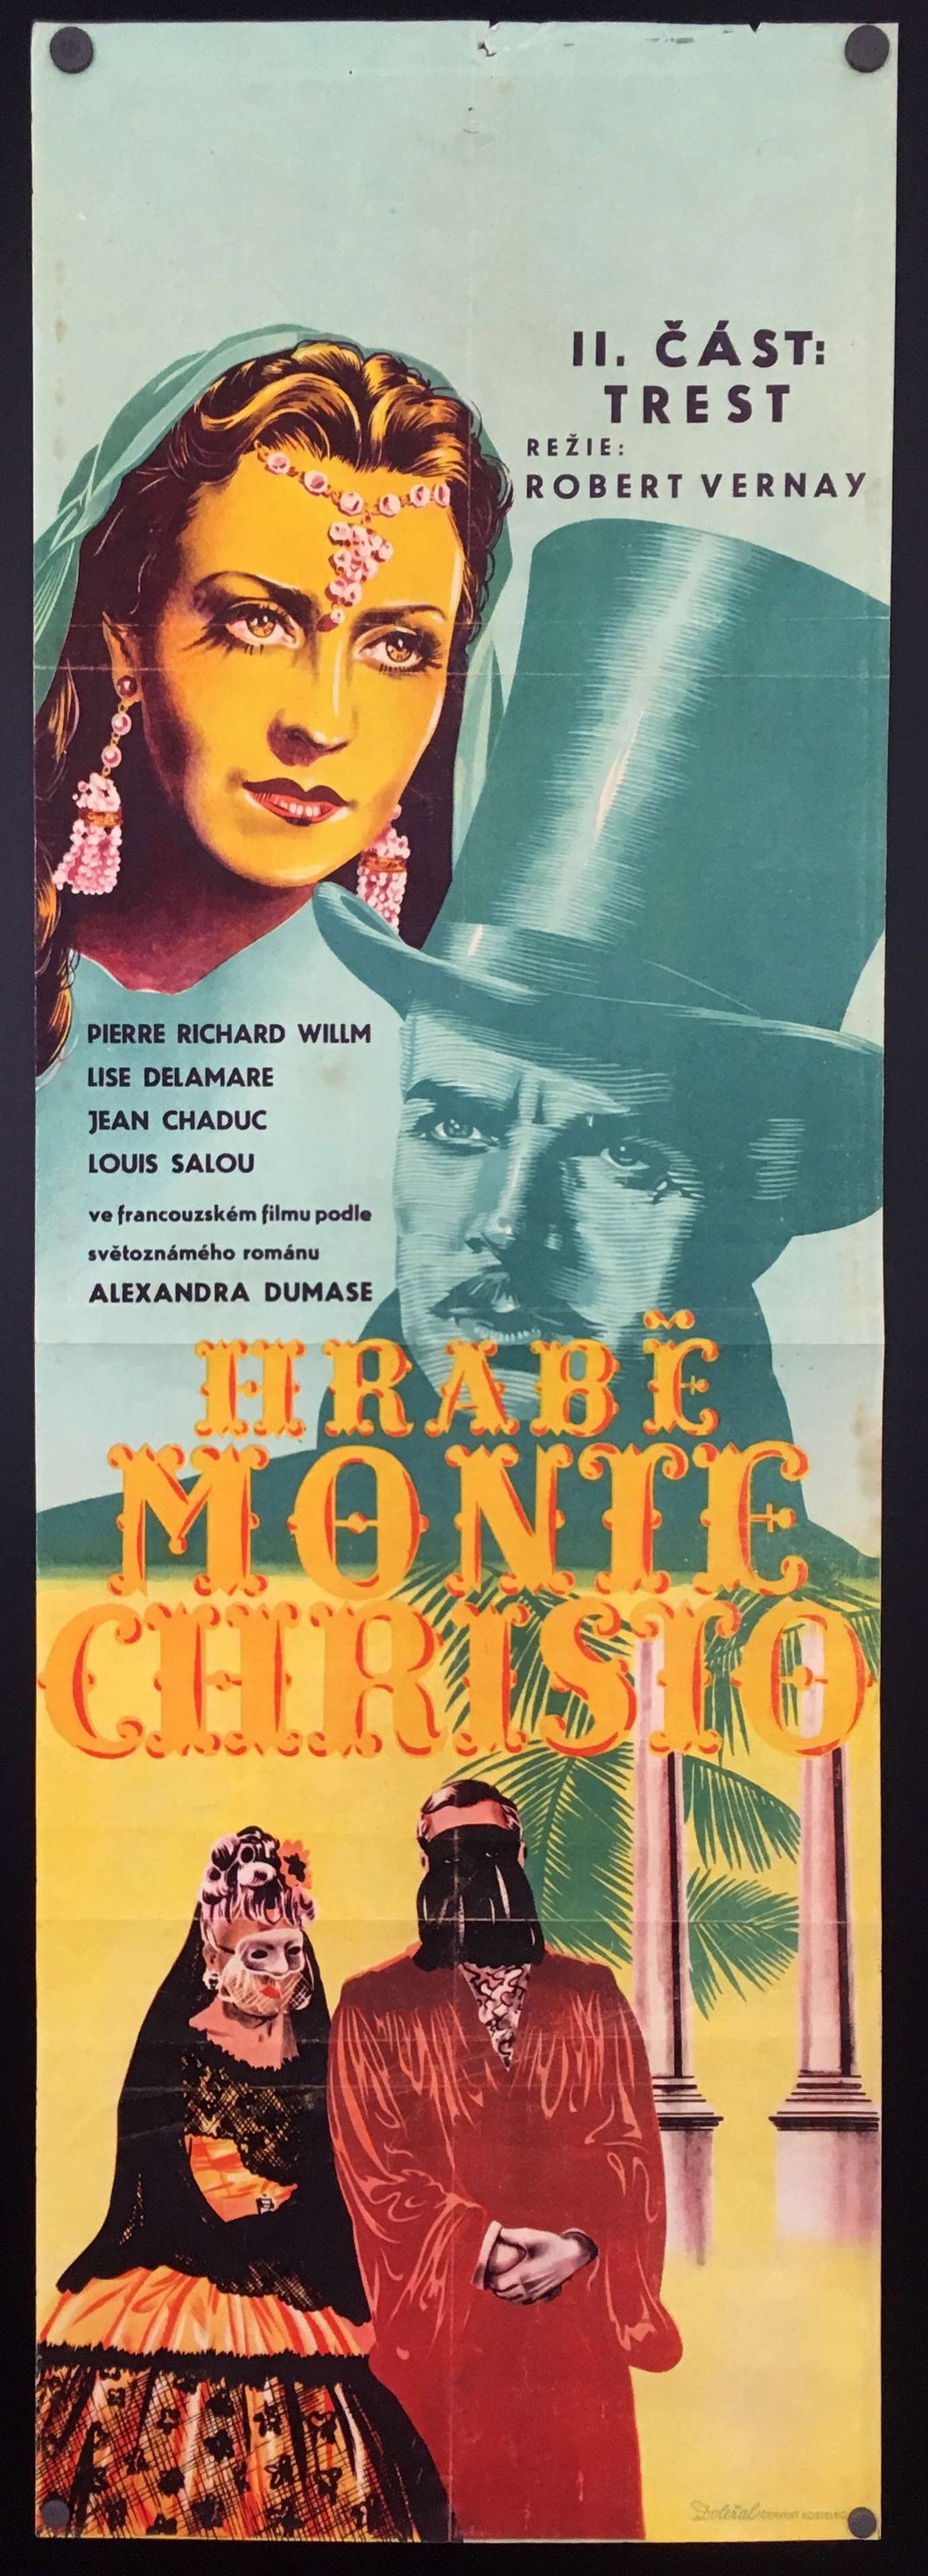 The Count of Monte Cristo Film by Robert Vernay Alexander Dumas Cinema Theatre Poster Czechoslovakia image of Pierre Richard-Willm and Michèle Alfa - Czech Poster Gallery